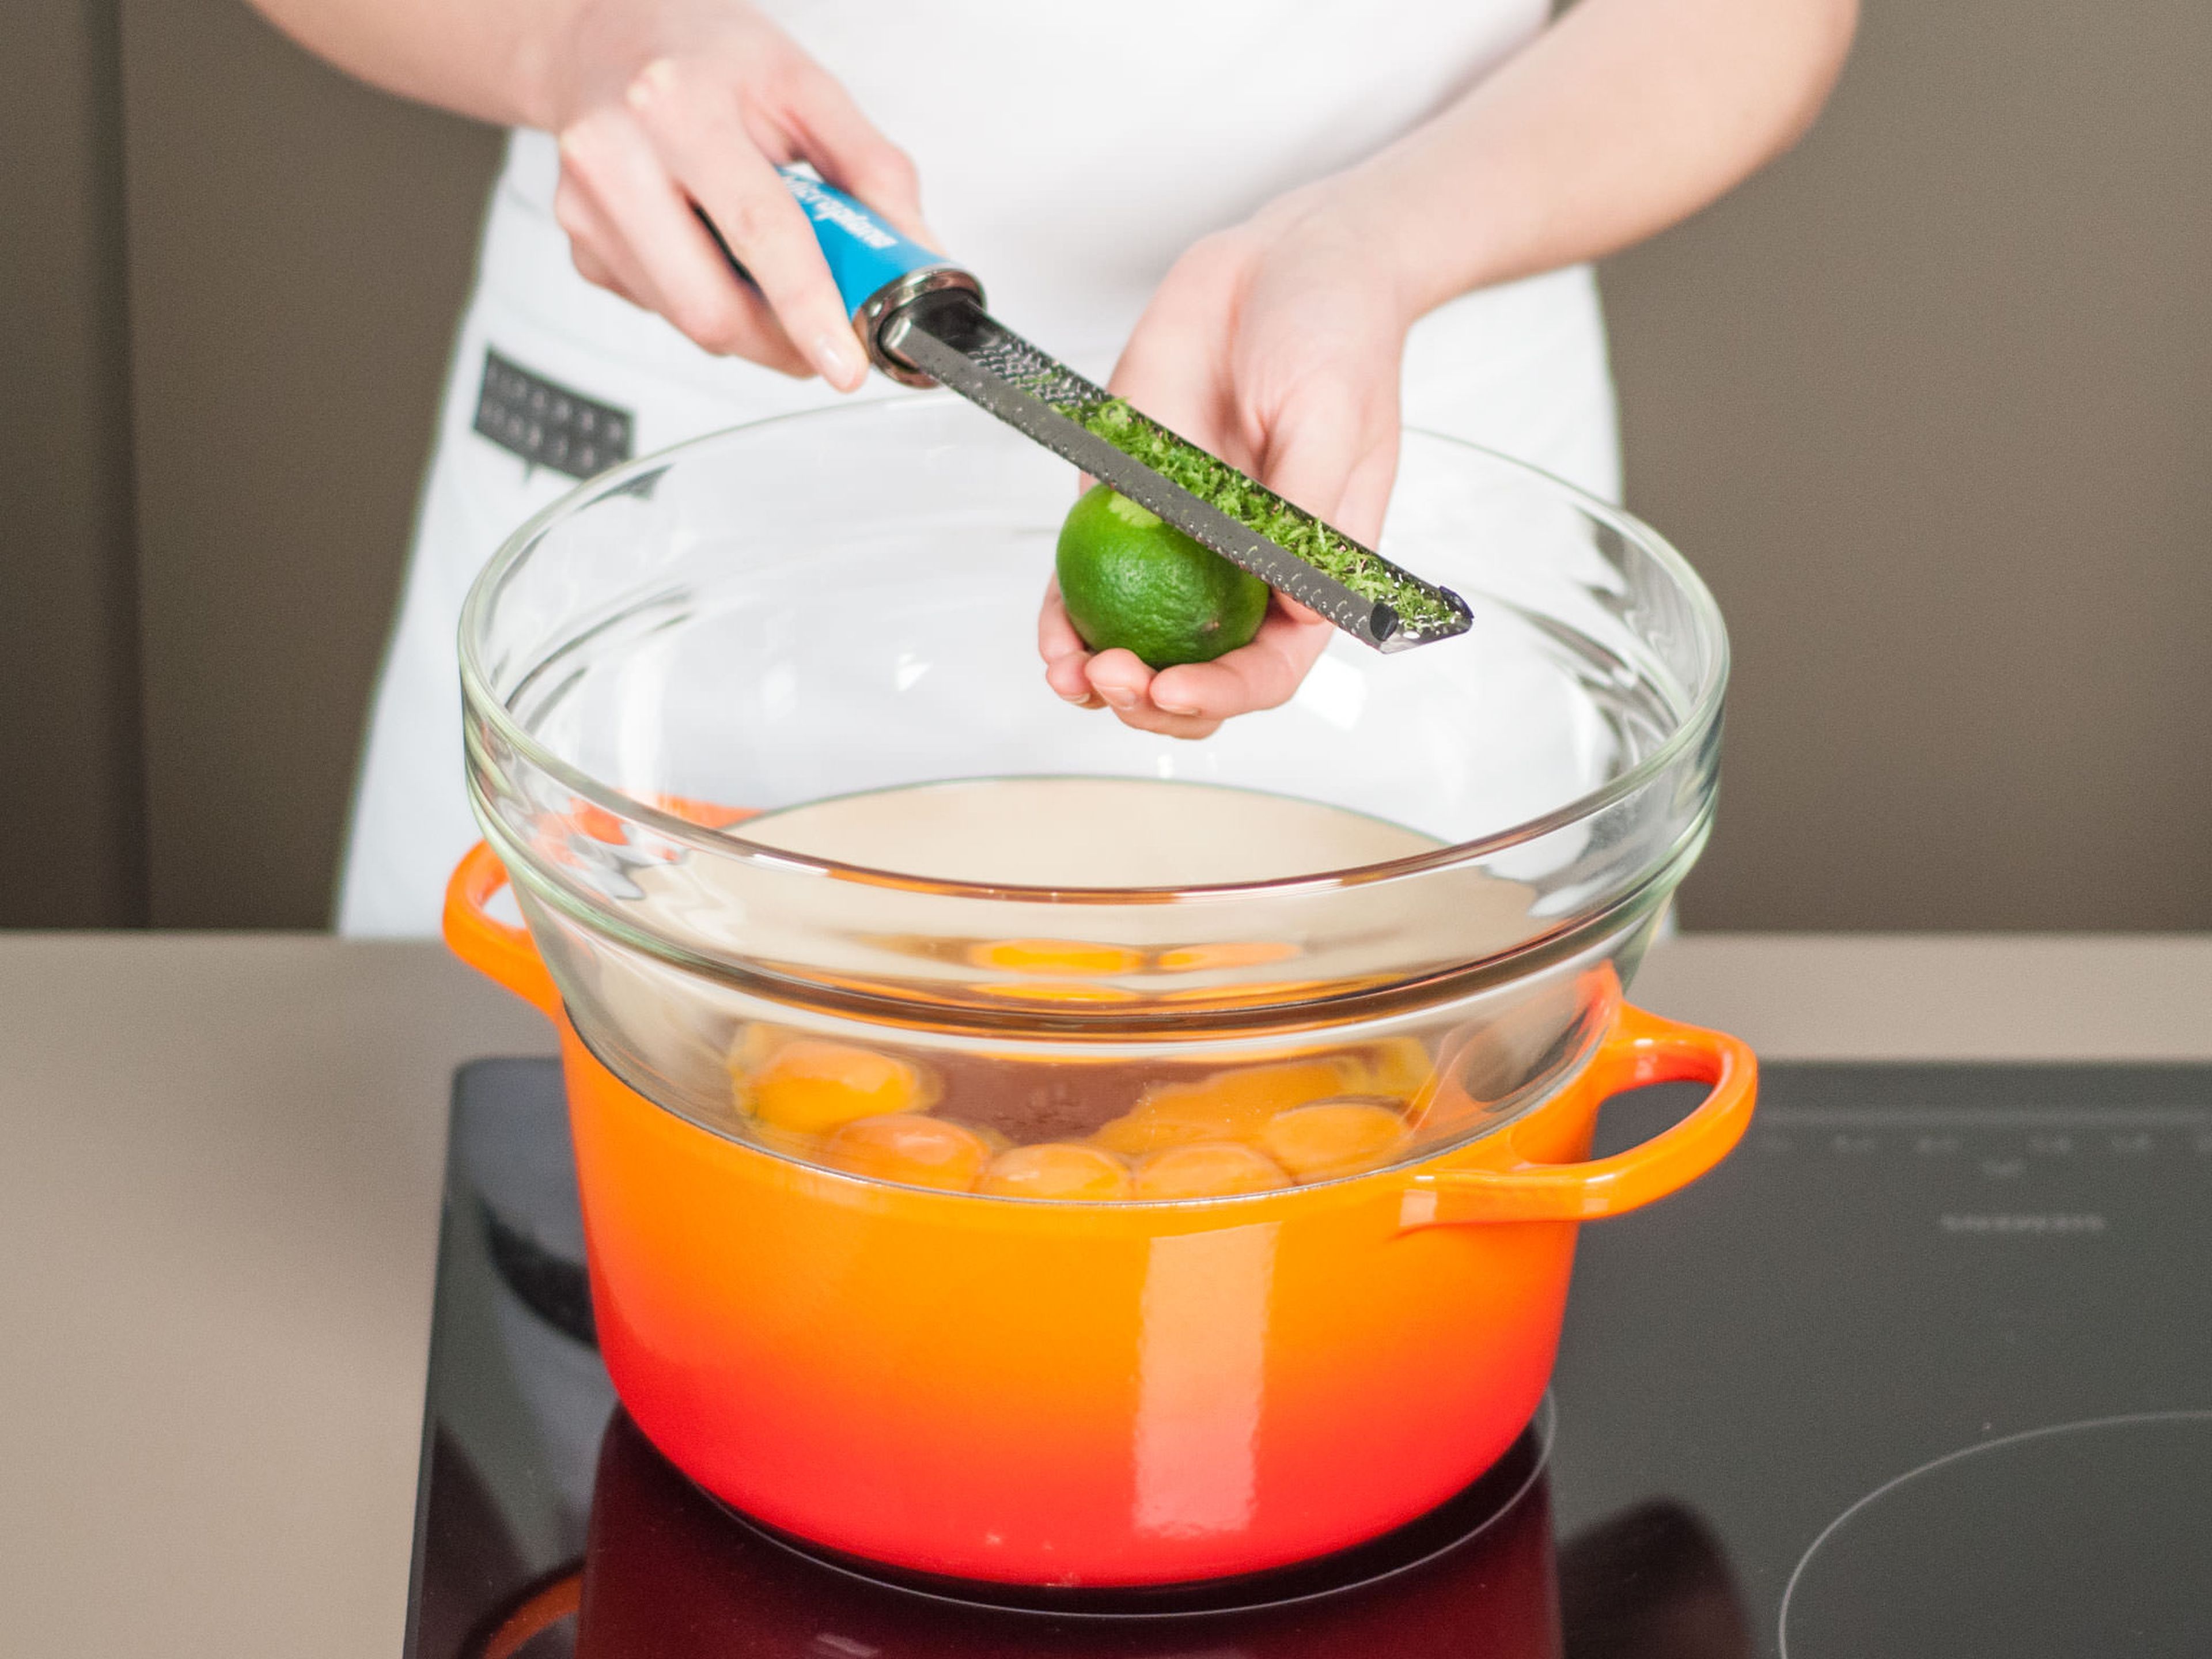 Add egg yolks, honey, and lime juice to a bowl. Place bowl on top of a saucepan with boiling water. Add lime zest and whisk for approx. 3 – 4 min. until sauce has thickened. Be careful not to overheat.